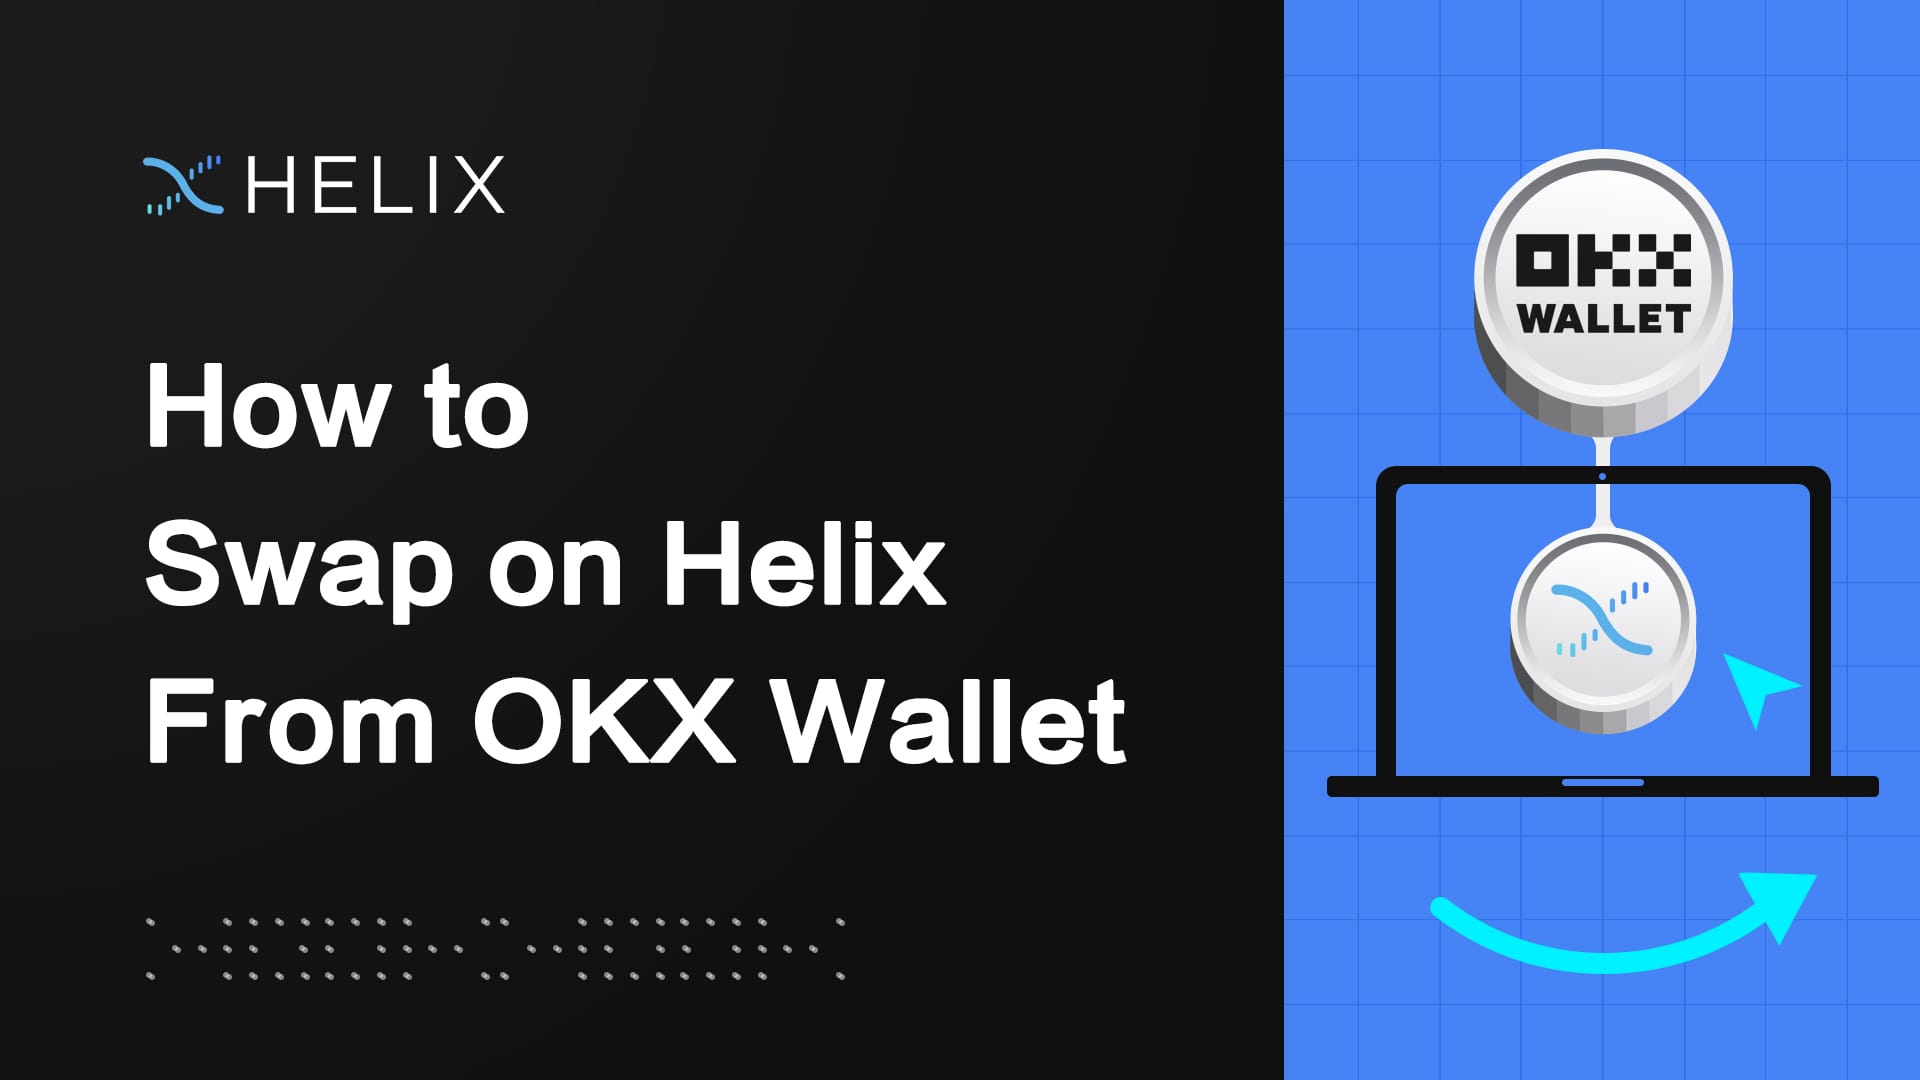 How to Swap on Helix From OKX Wallet